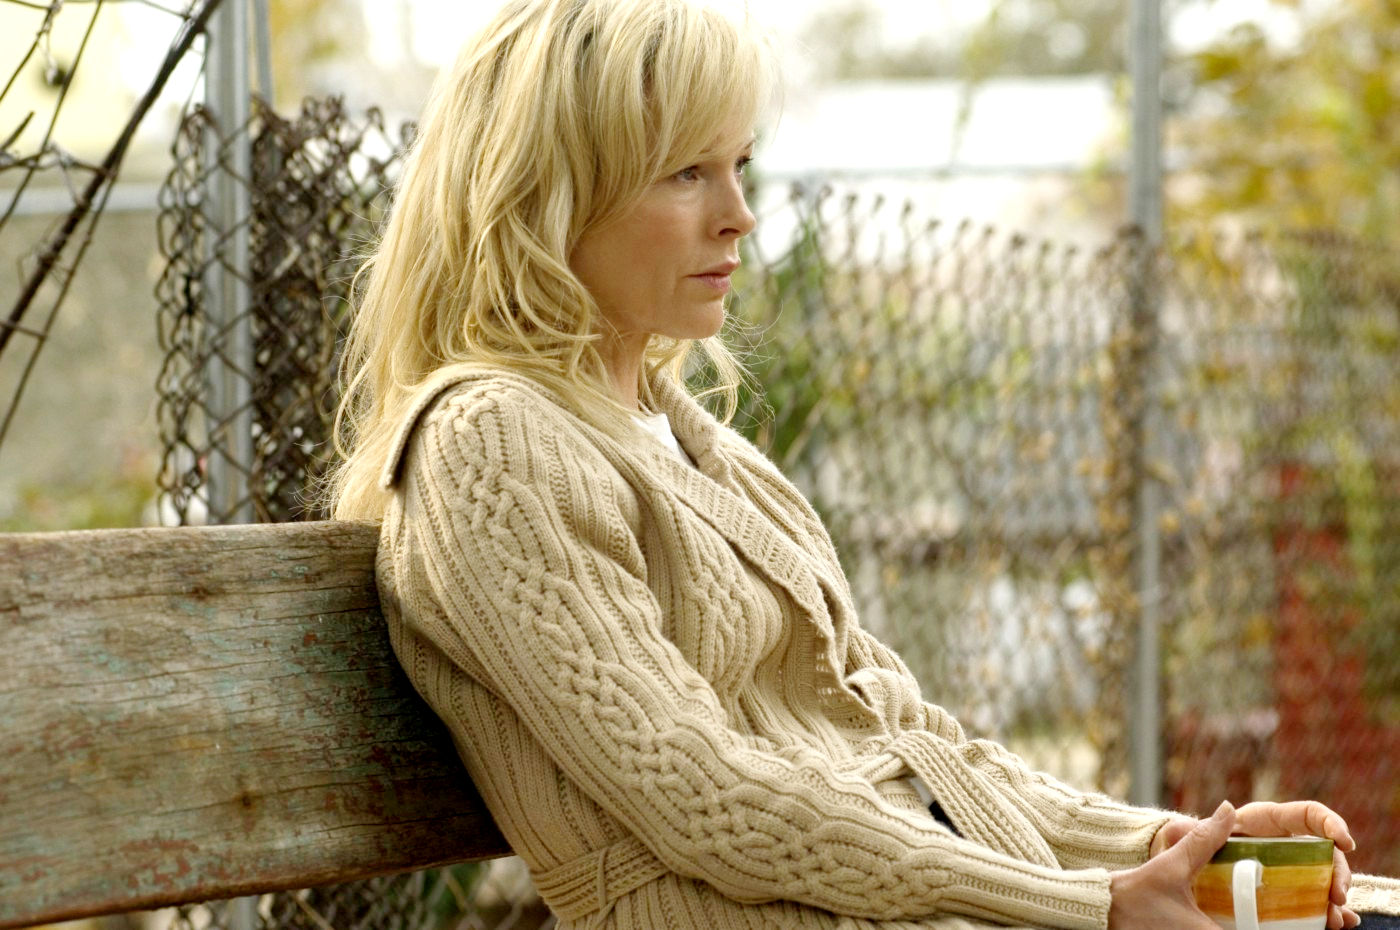 Kim Basinger stars as Gina in Magnolia Pictures' The Burning Plain (2009)